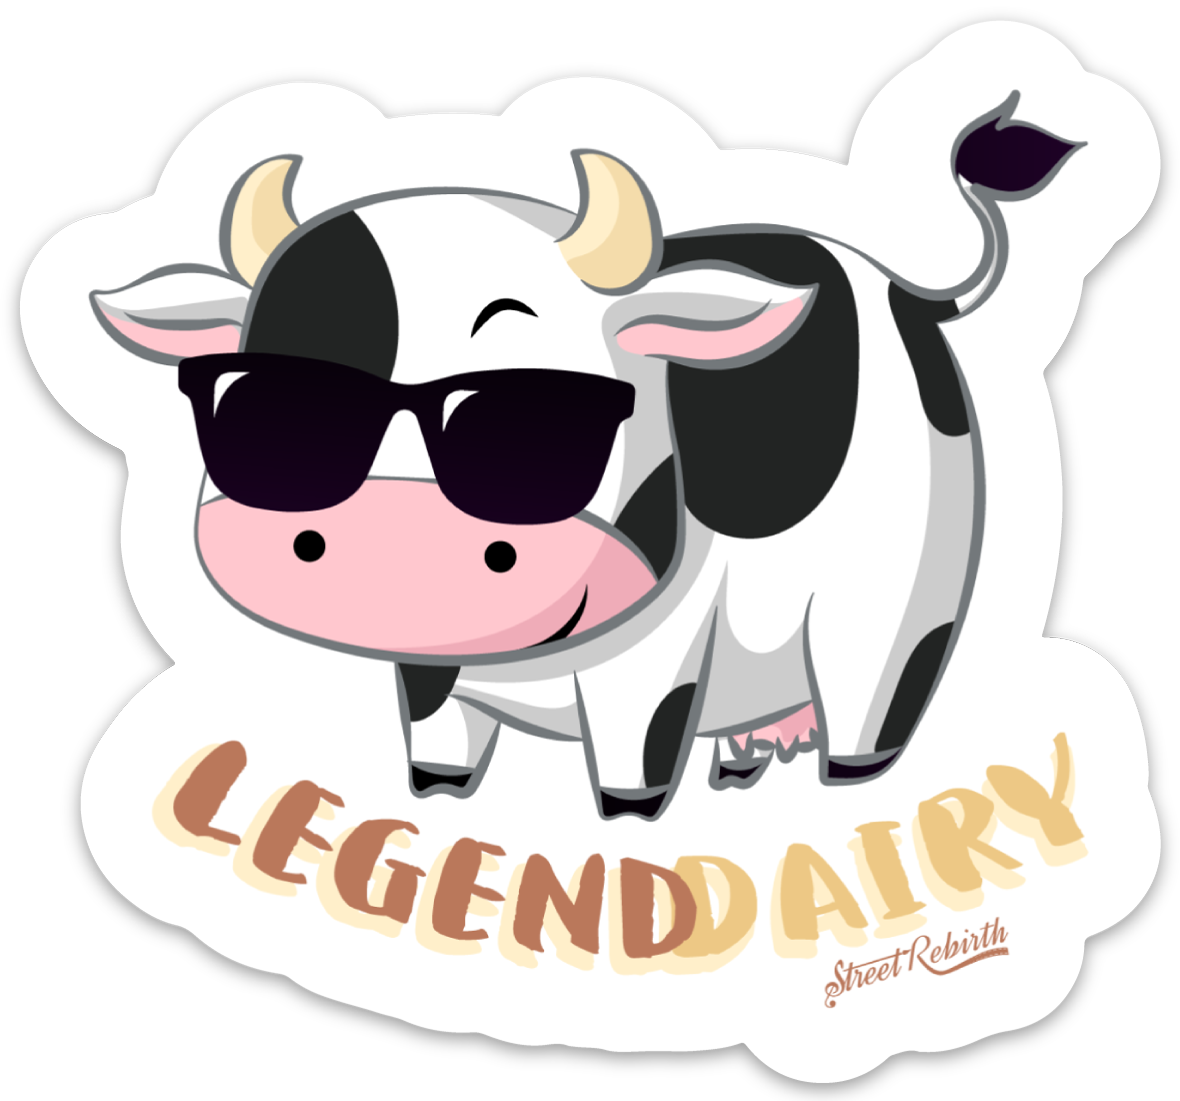 LEGEND DAIRY PUN STICKER – ONE 4 INCH WATER PROOF VINYL STICKER – FOR HYDRO FLASK, SKATEBOARD, LAPTOP, PLANNER, CAR, COLLECTING, GIFTING